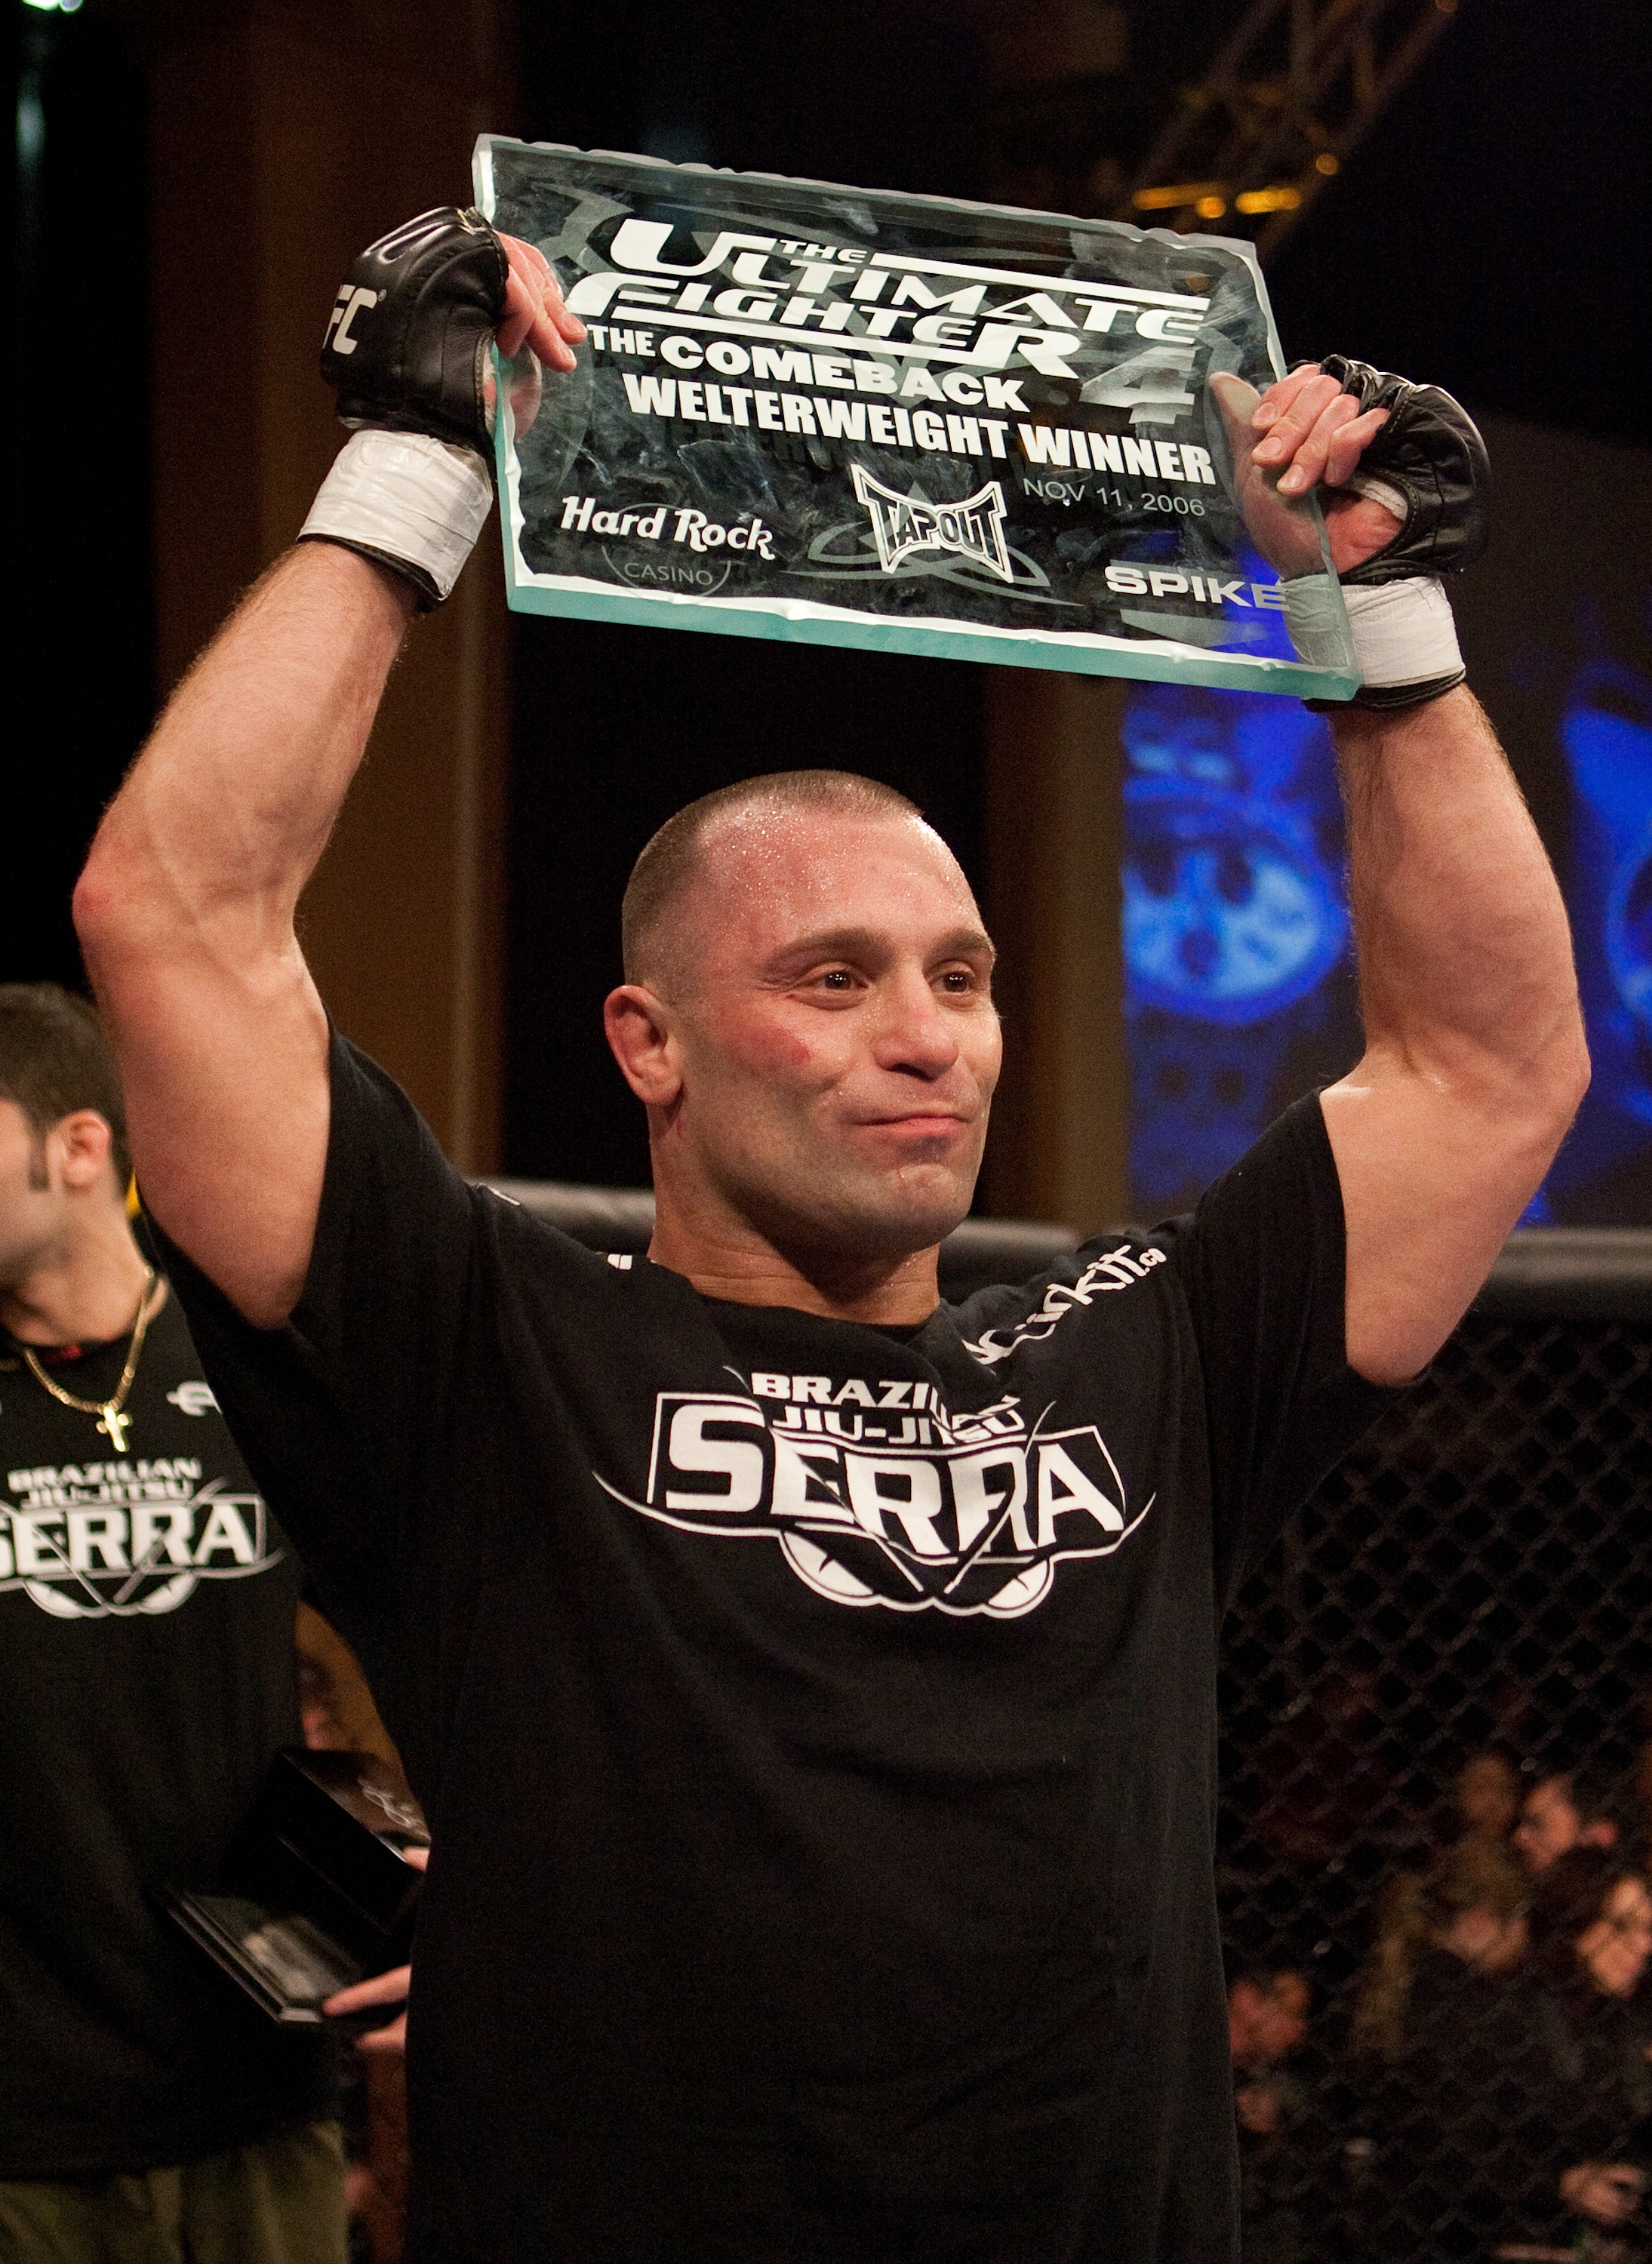 LAS VEGAS - NOVEMBER 11: Matt Serra is victorious over Chris Lytle at The Ultimate Fighter 4 Finale at the Joint at the Hard Rock on November 11, 2006 in Las Vegas, Nevada. (Photo by Josh Hedges/Zuffa LLC)